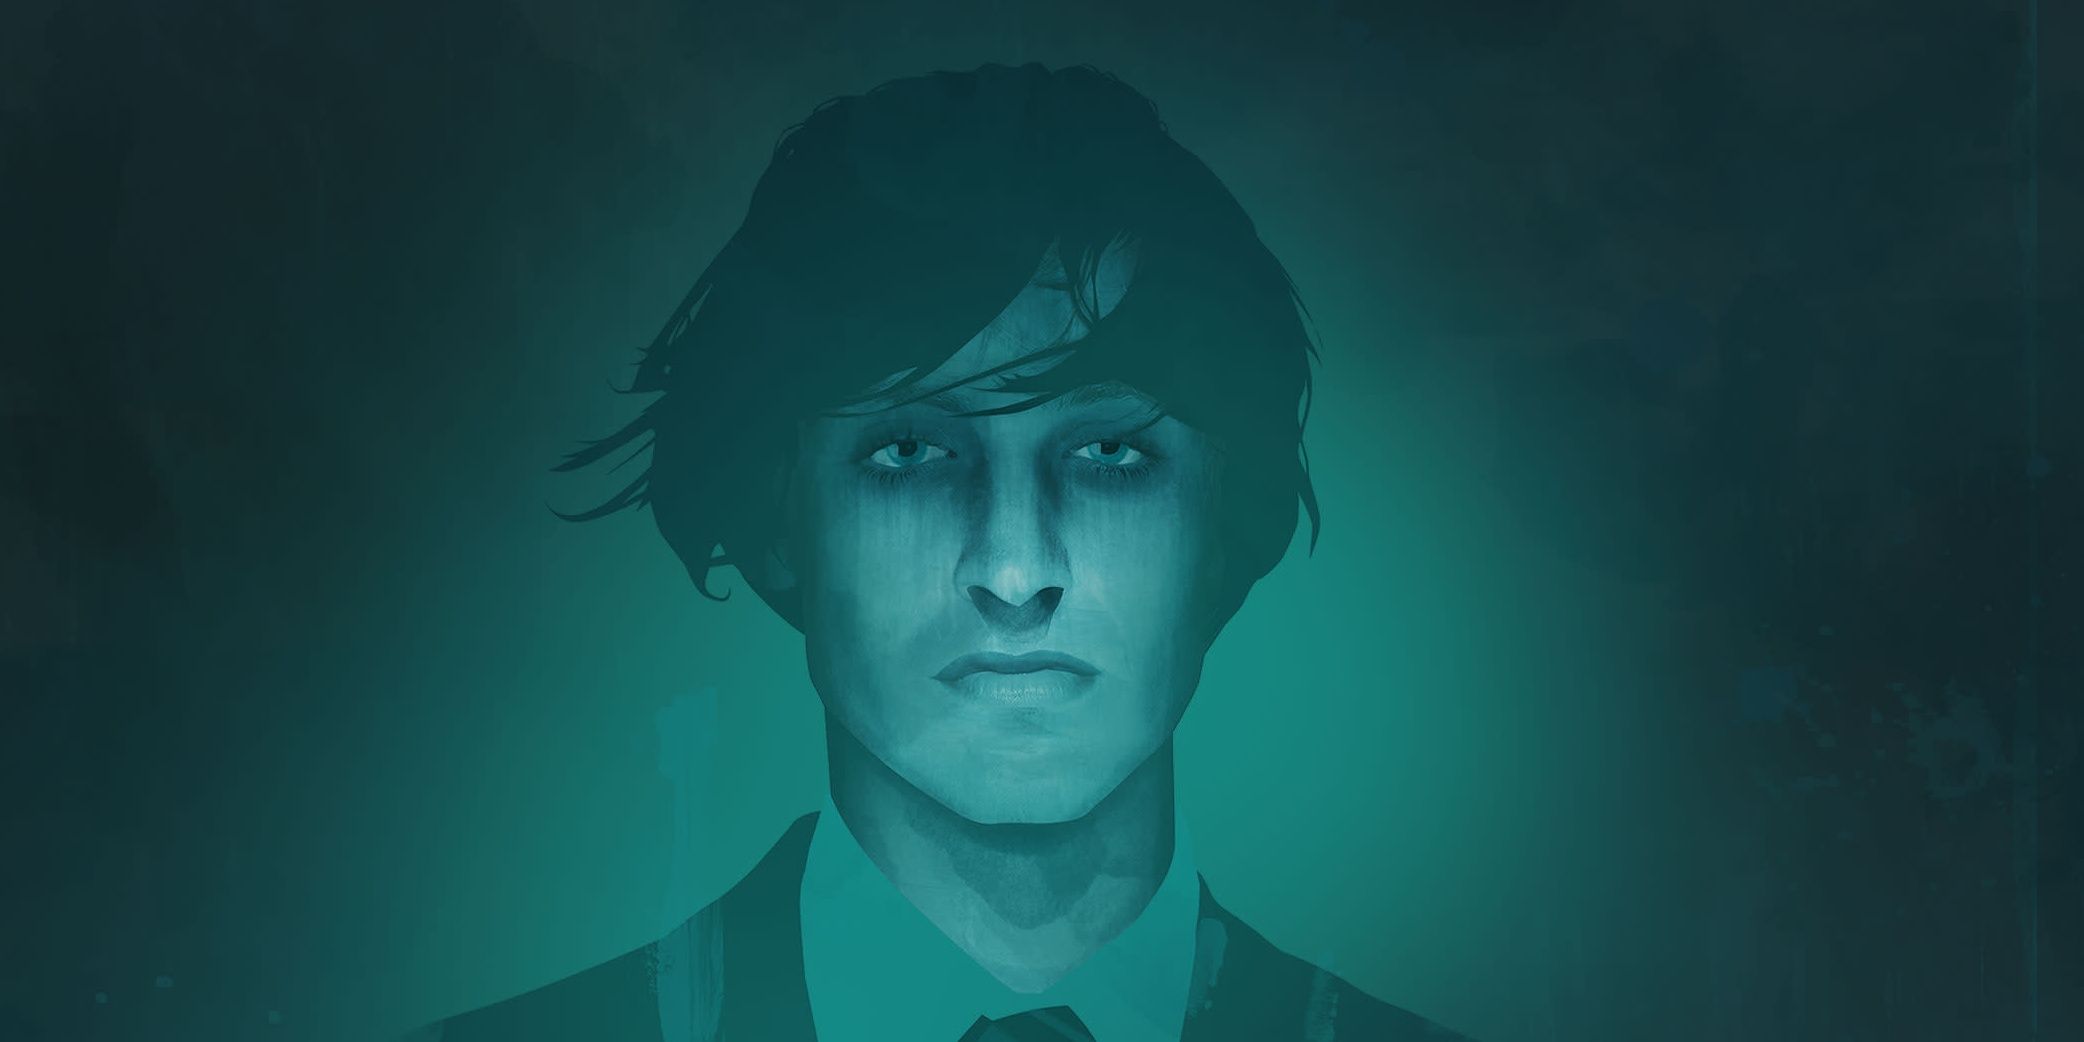 Regulus Black in an image from Pottermore